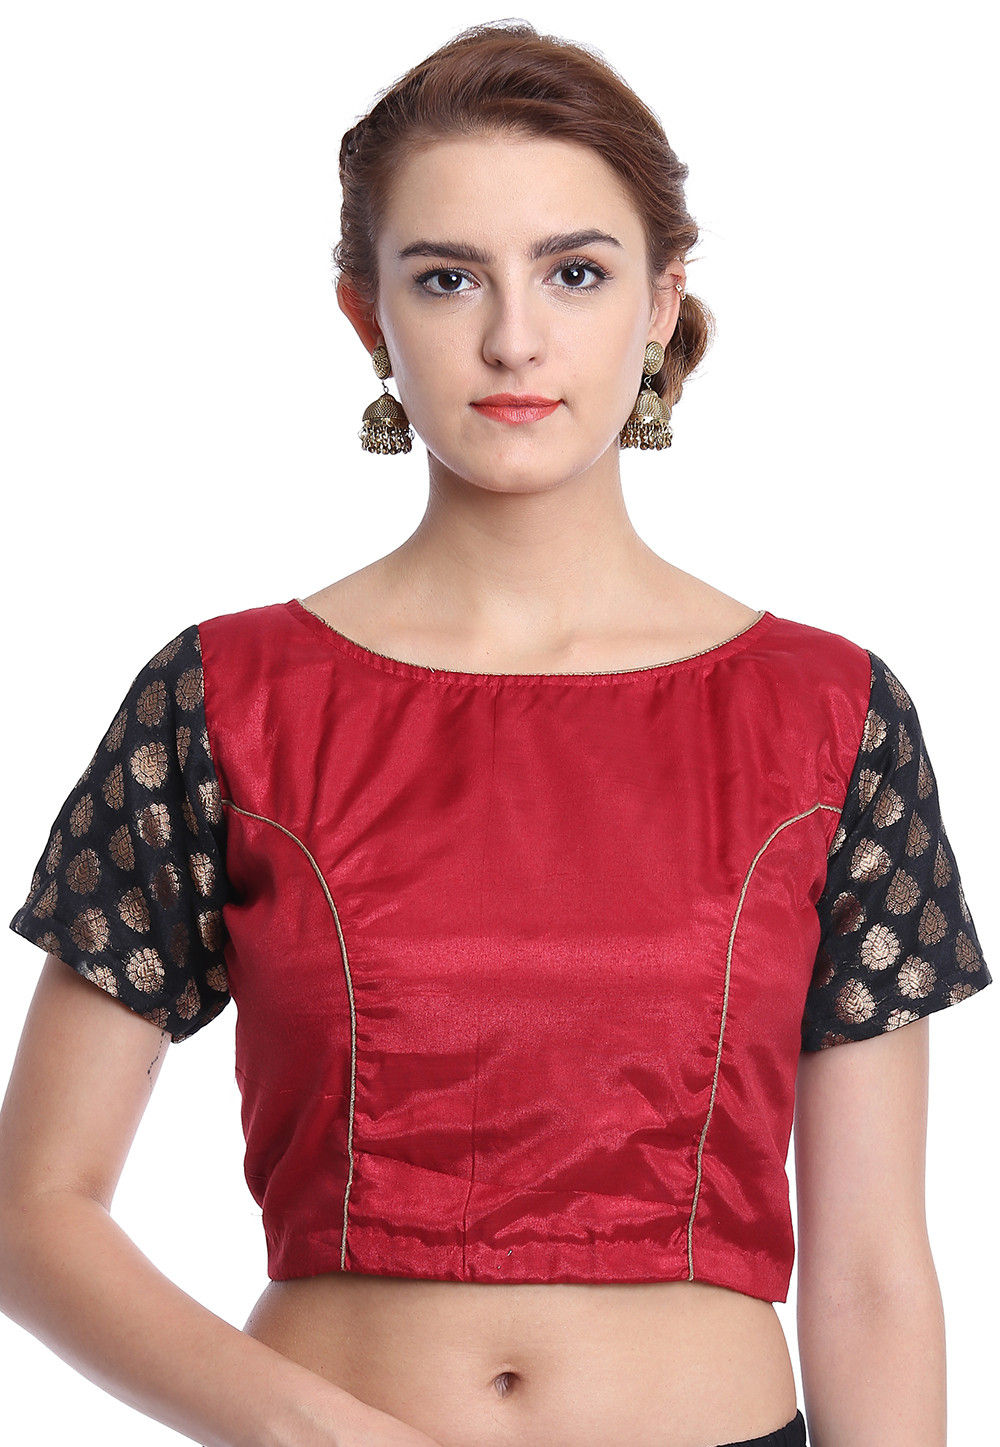 Victorian GOVERNESS Blouse /& Burgundy Skirt All Ages